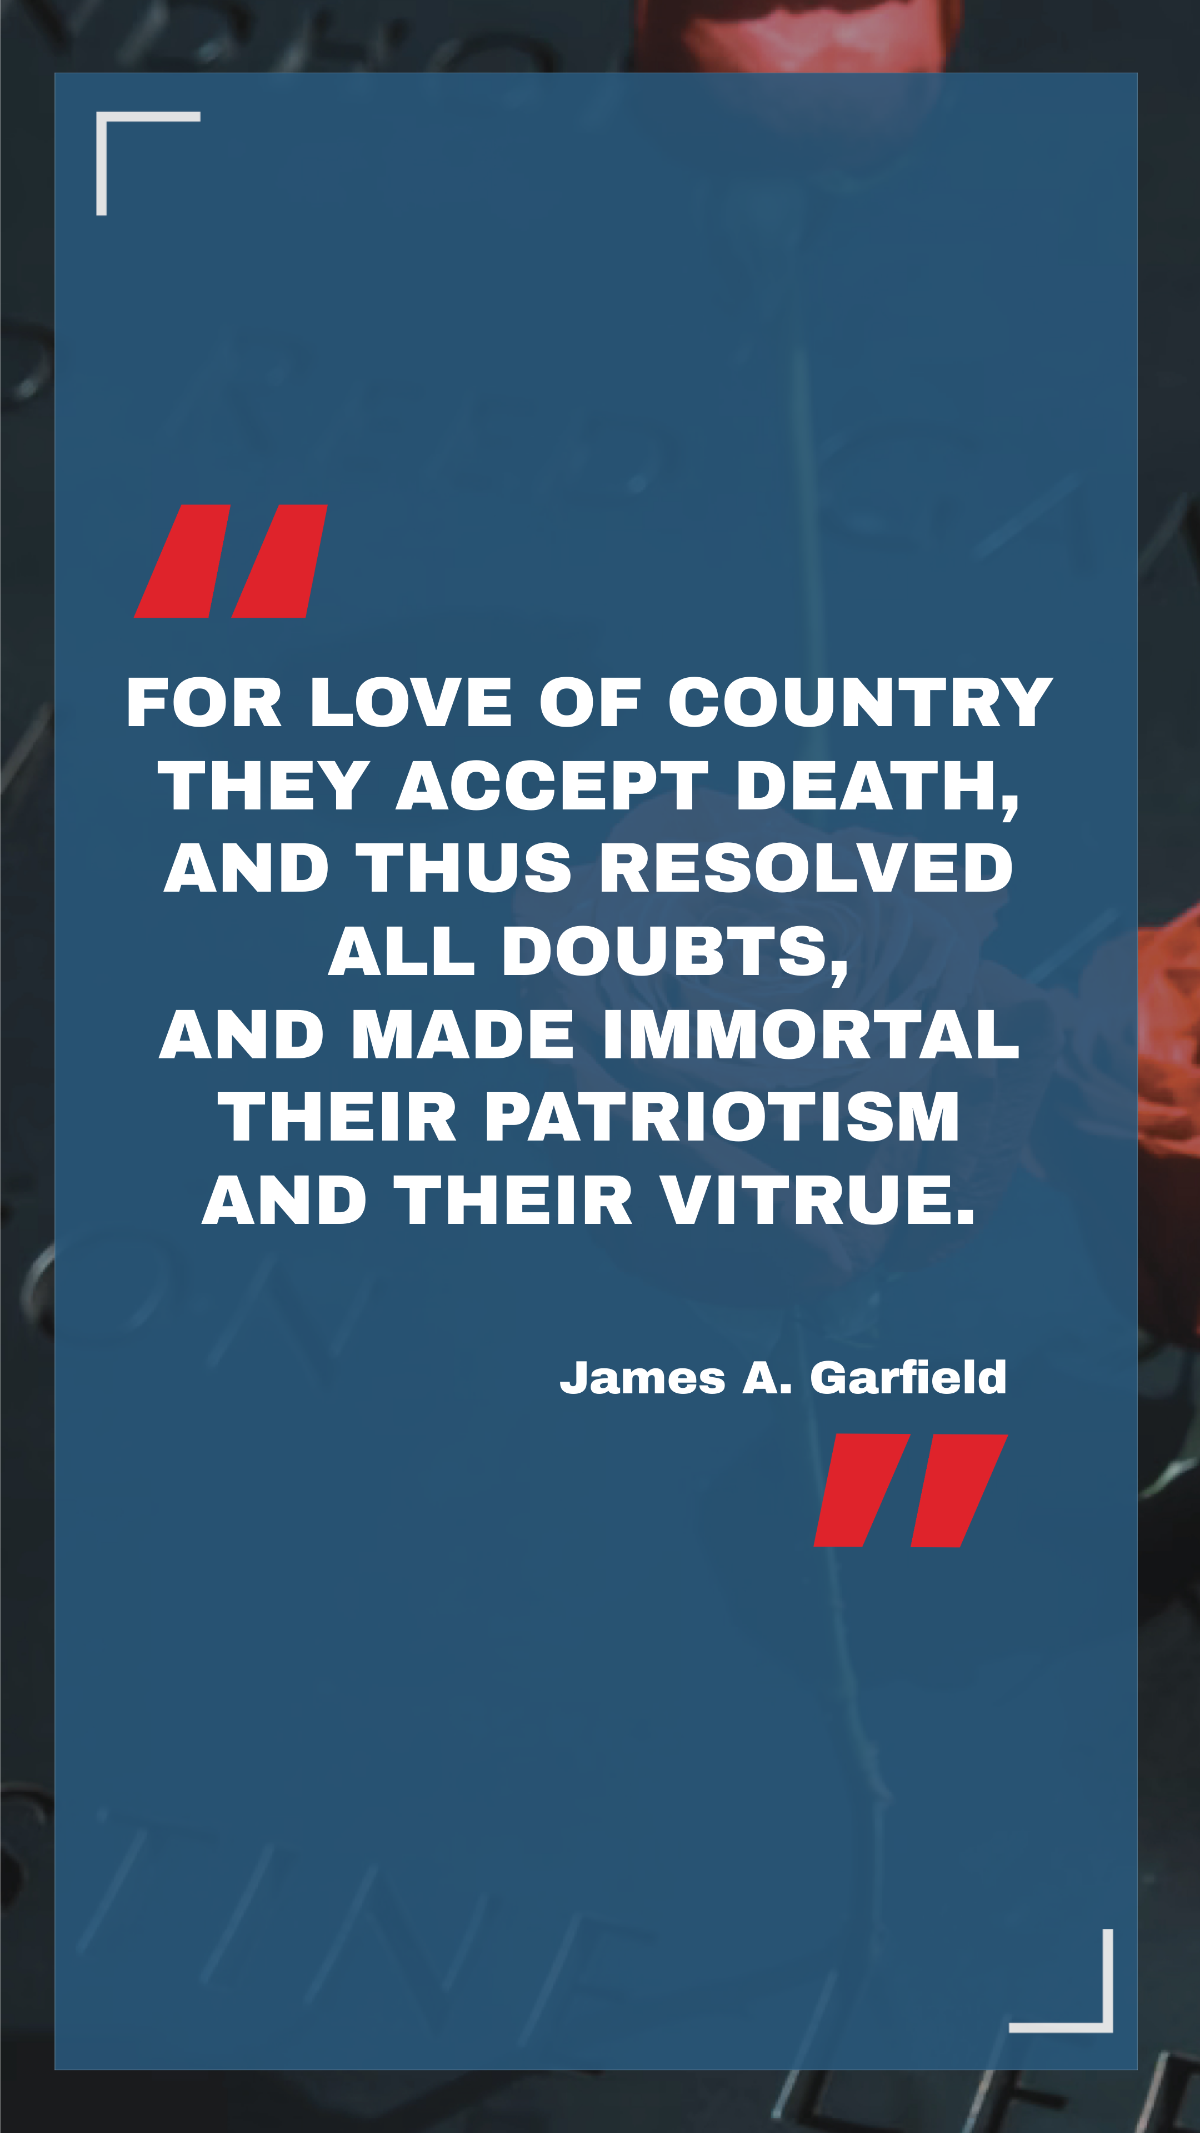 Free James A. Garfield - For love of country they accepted death, and thus resolved all doubts, and made immortal their patriotism and their virtue. Template